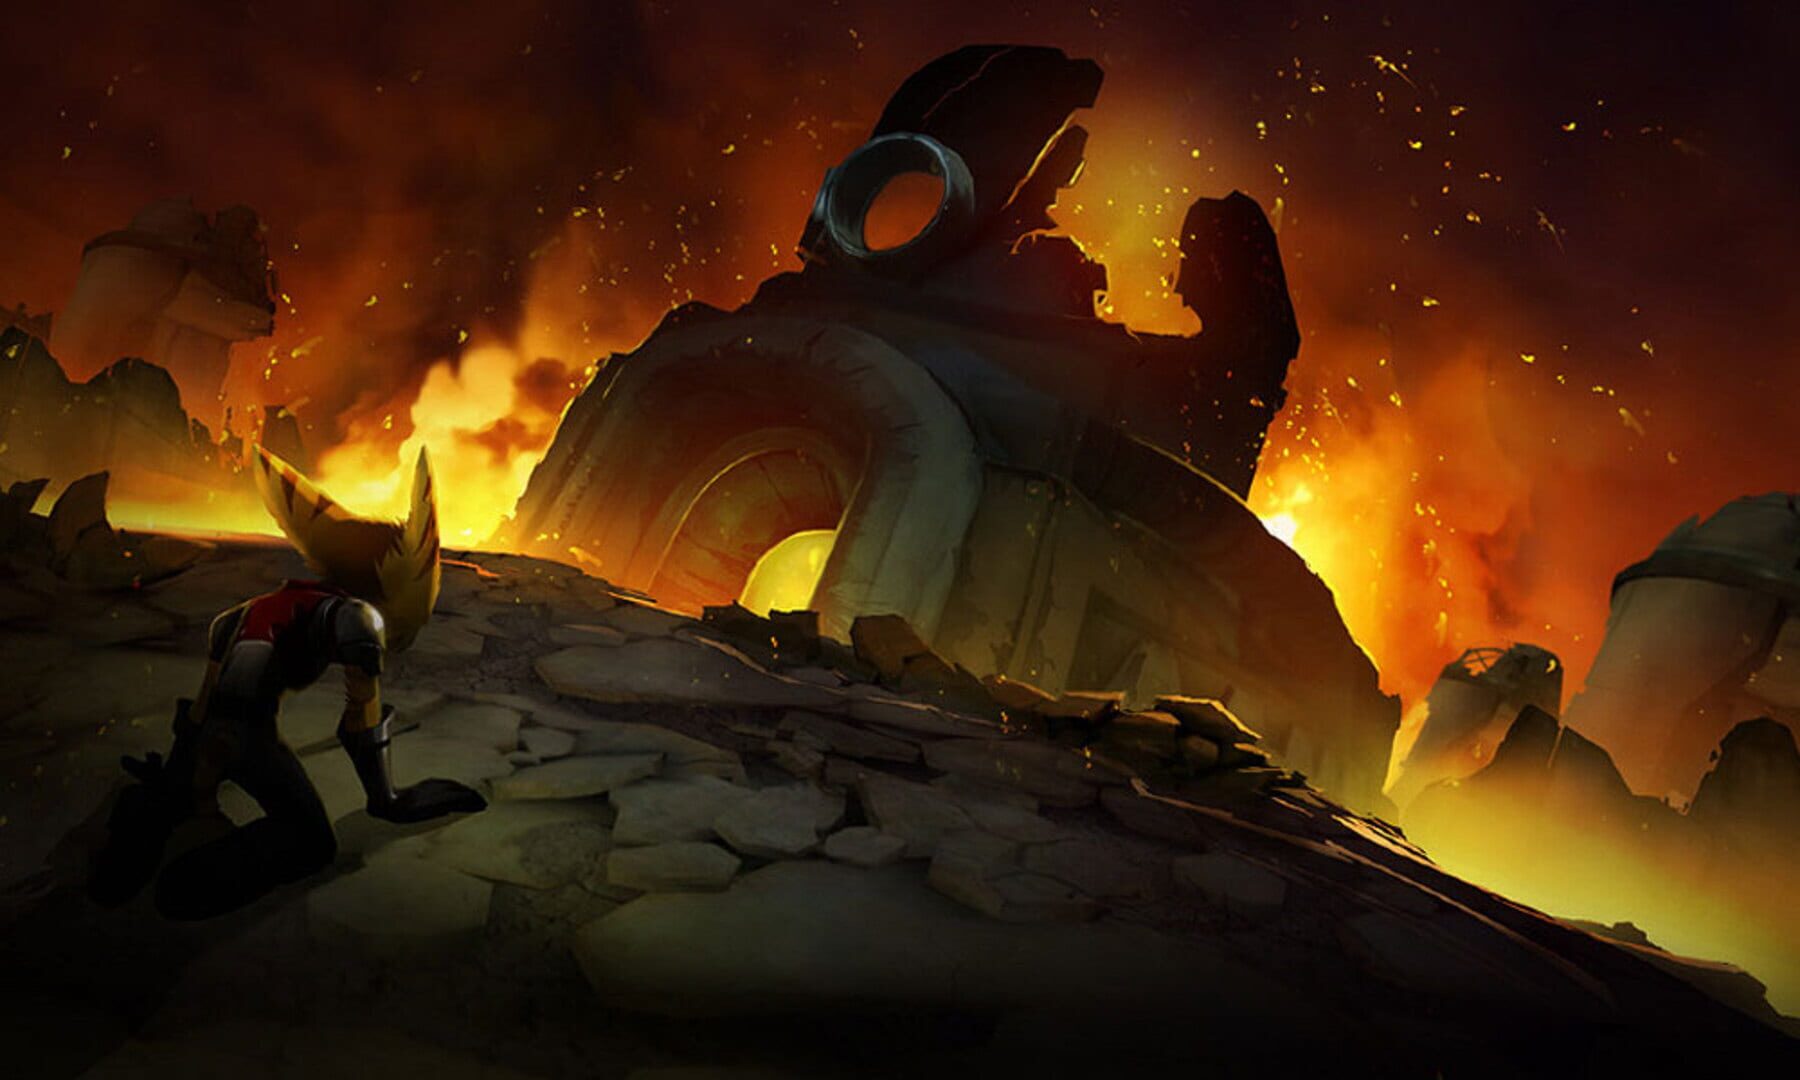 Ratchet & Clank Future: A Crack in Time Image